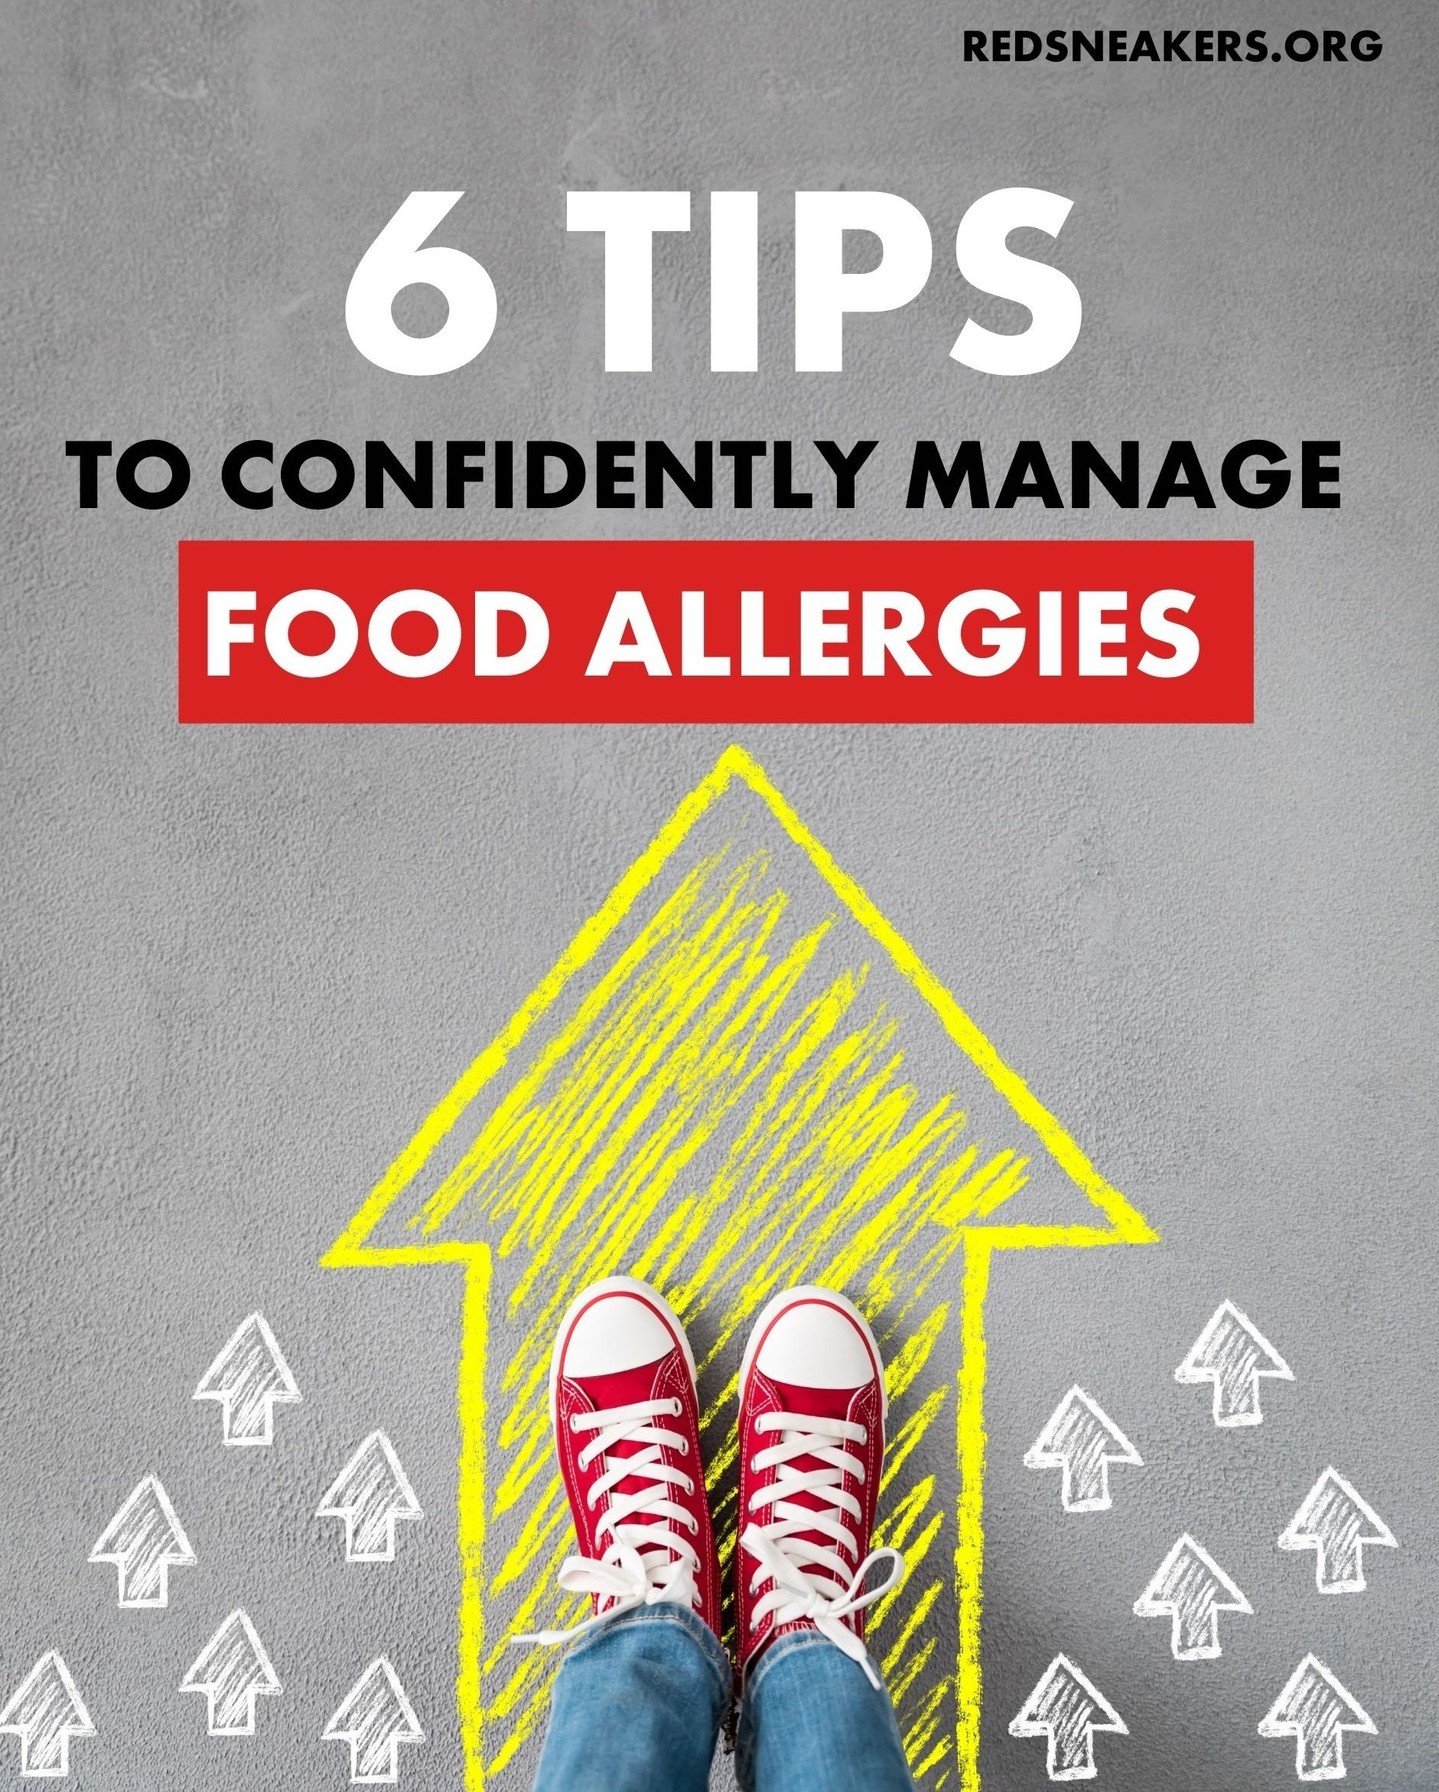 Living with food allergies can be challenging, so we've put together some tips that can help you manage them.

1️⃣ ALWAYS BE PREPARED
It helps to plan ahead and be prepared wherever you go. Pack safe snacks or meals when traveling or attending events